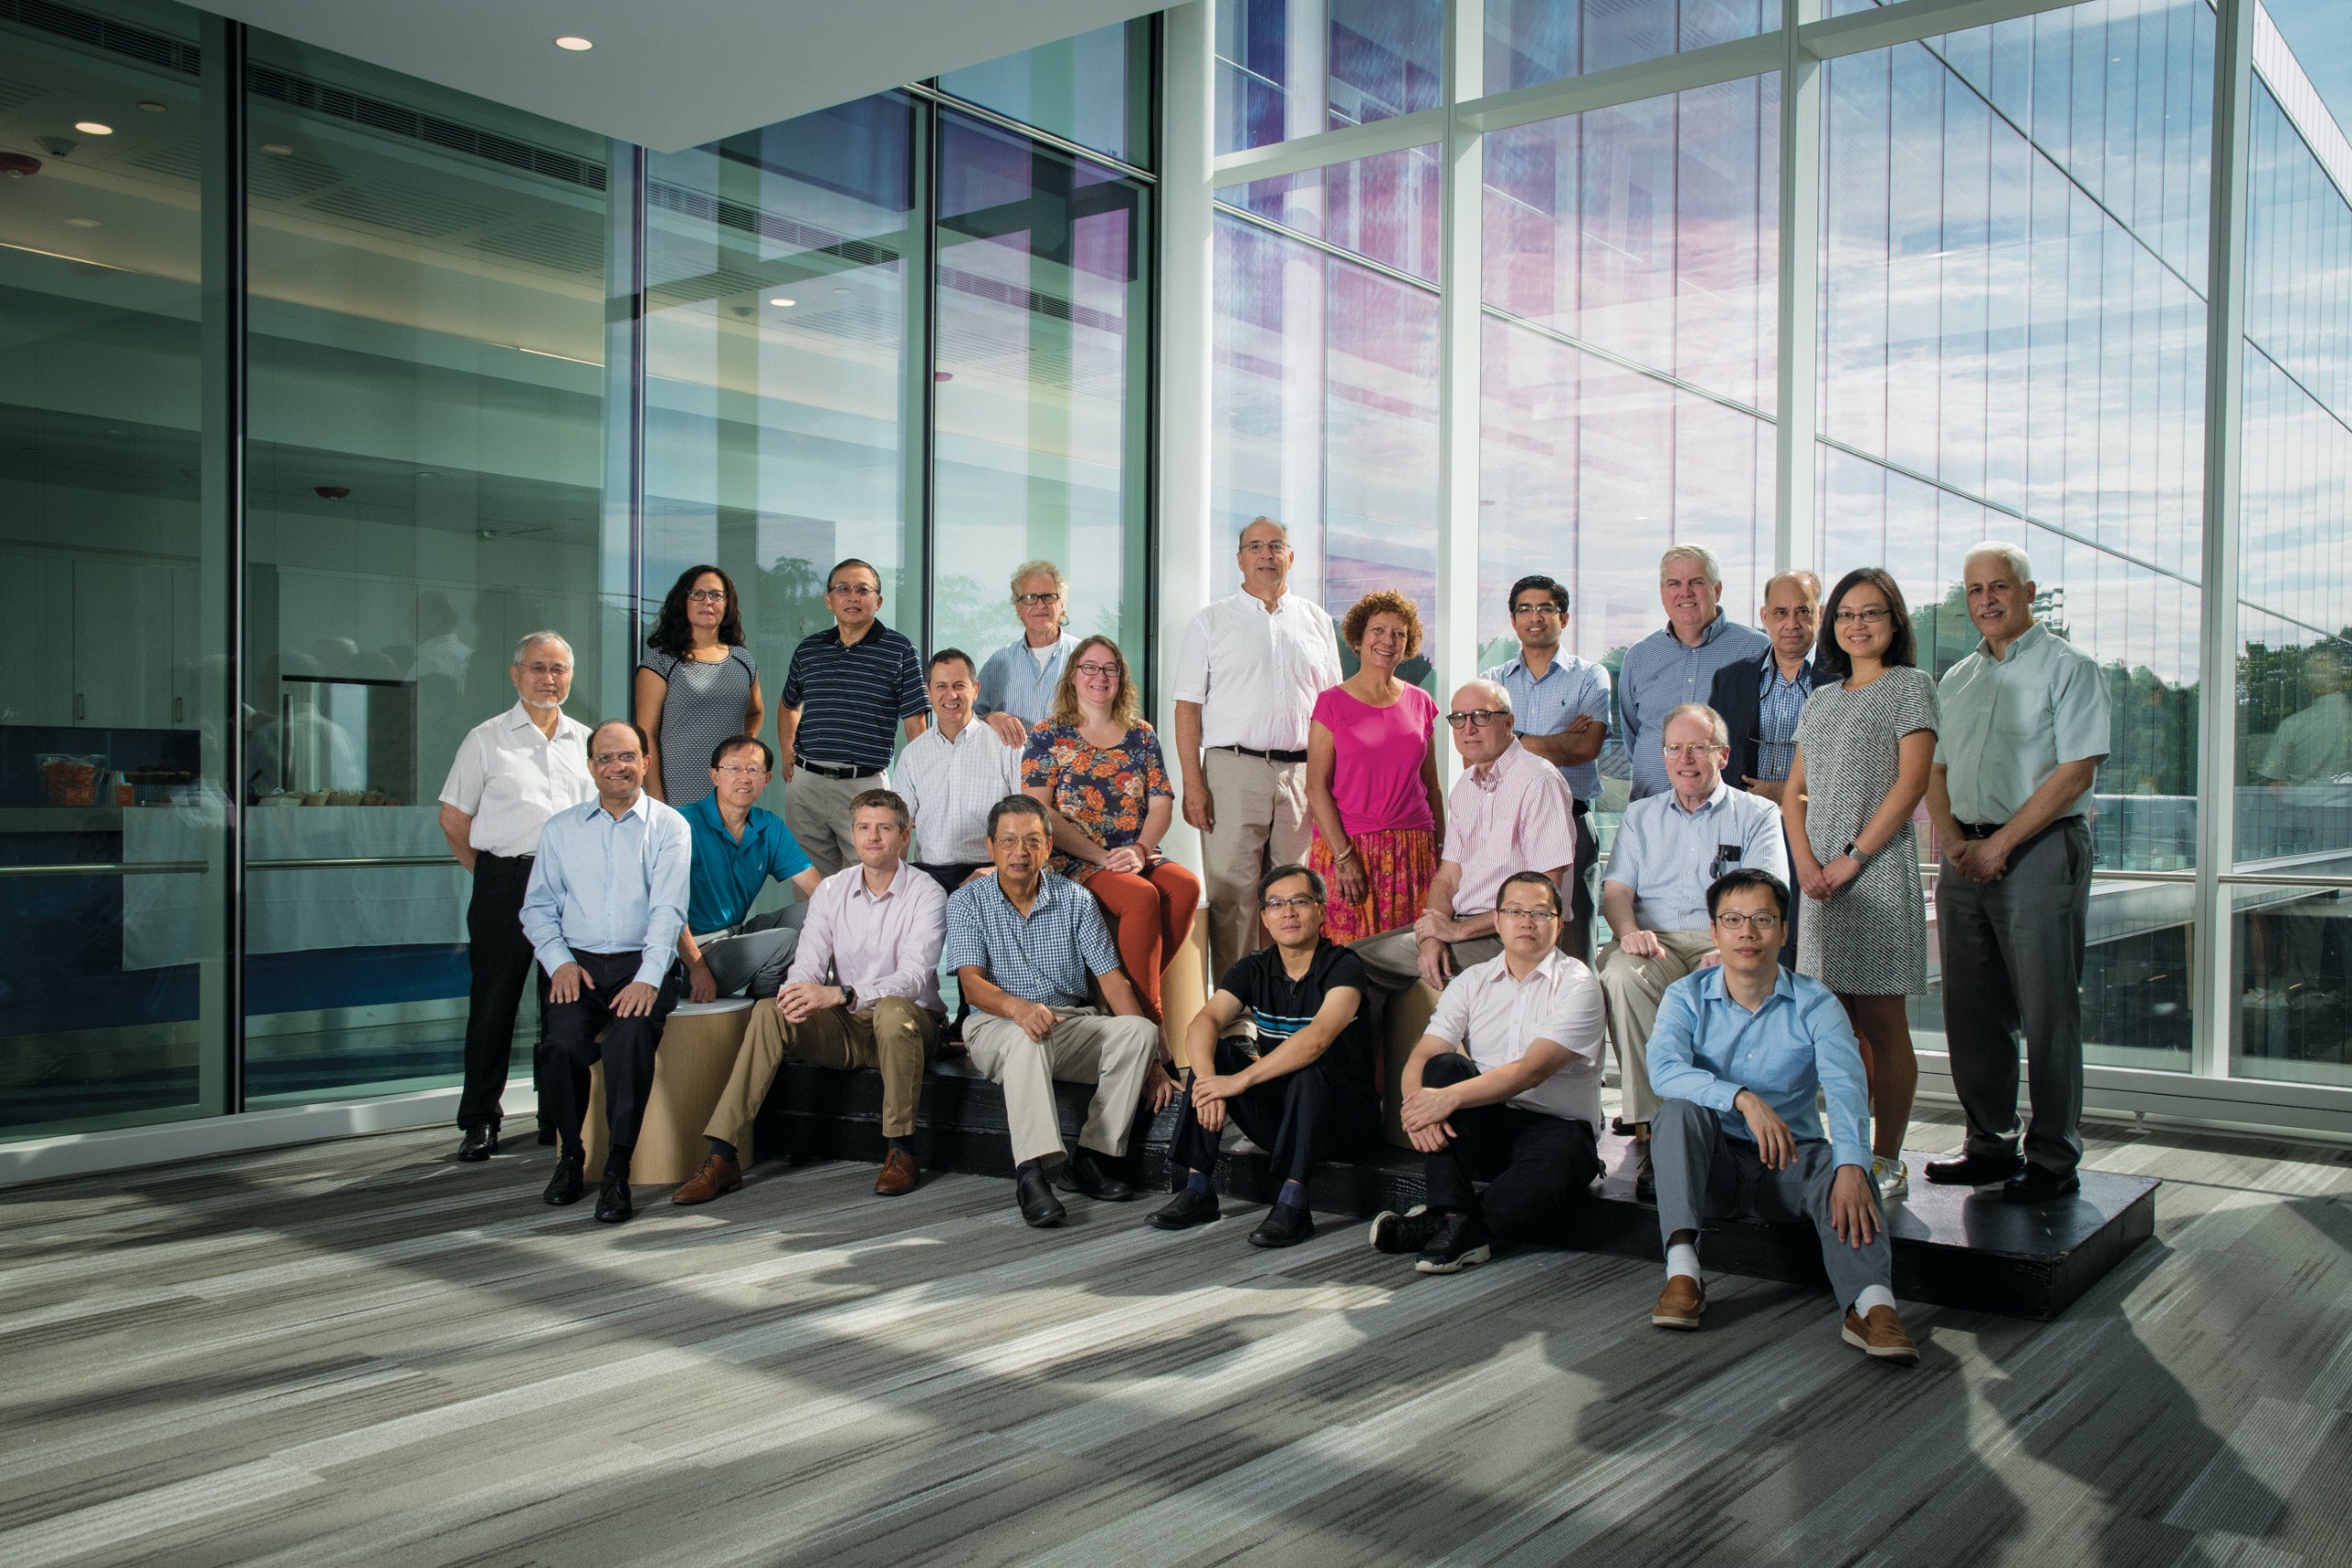 A group shot of some faculty gathered in the URI College of Engineering's new facility.